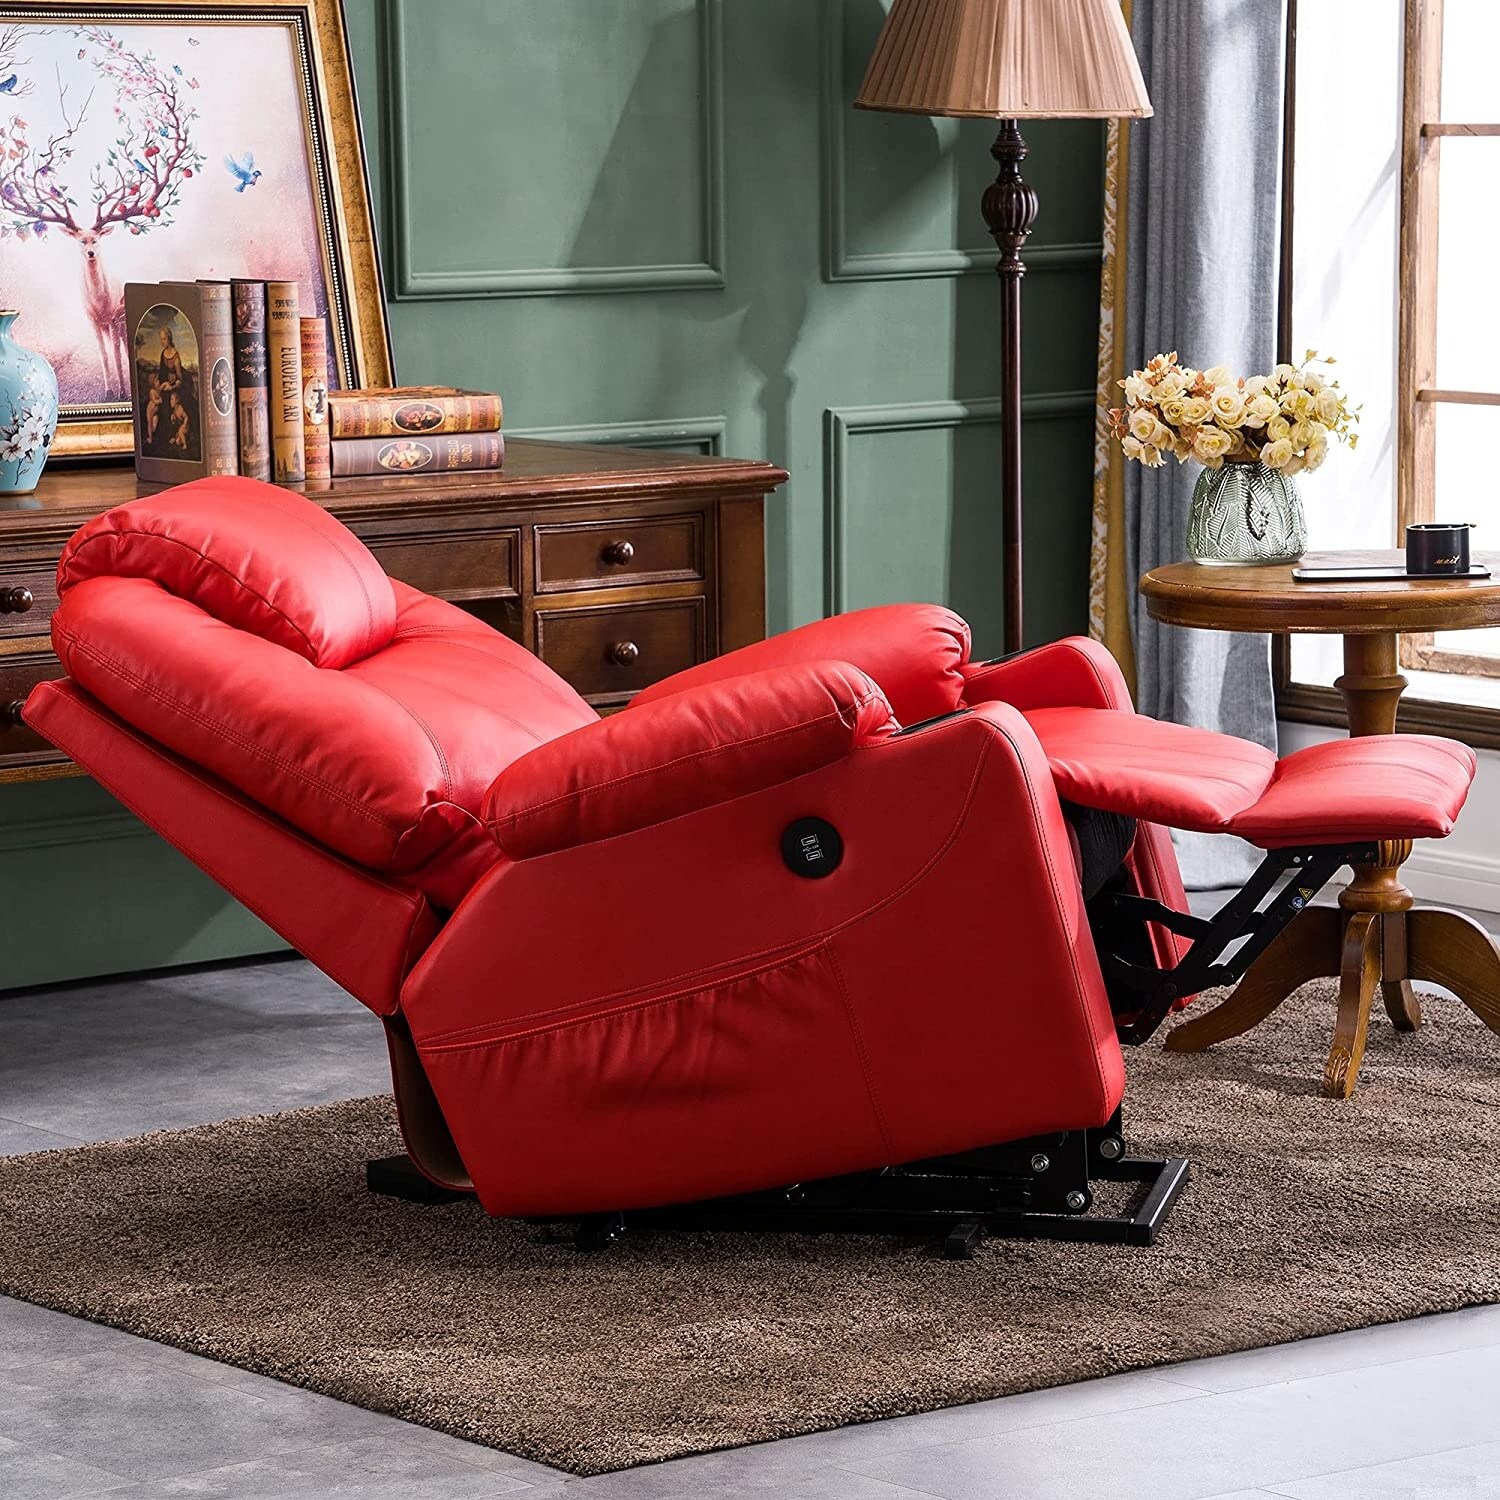 https://ak1.ostkcdn.com/images/products/is/images/direct/82457404369f64b9cba8205944f8dba805c8cca2/Mcombo-Electric-Power-Lift-Recliner-Chair-Sofa-with-Massage-and-Heat-for-Elderly%2C-Pockets-and-Cup-Holders-Faux-Leather-7040.jpg